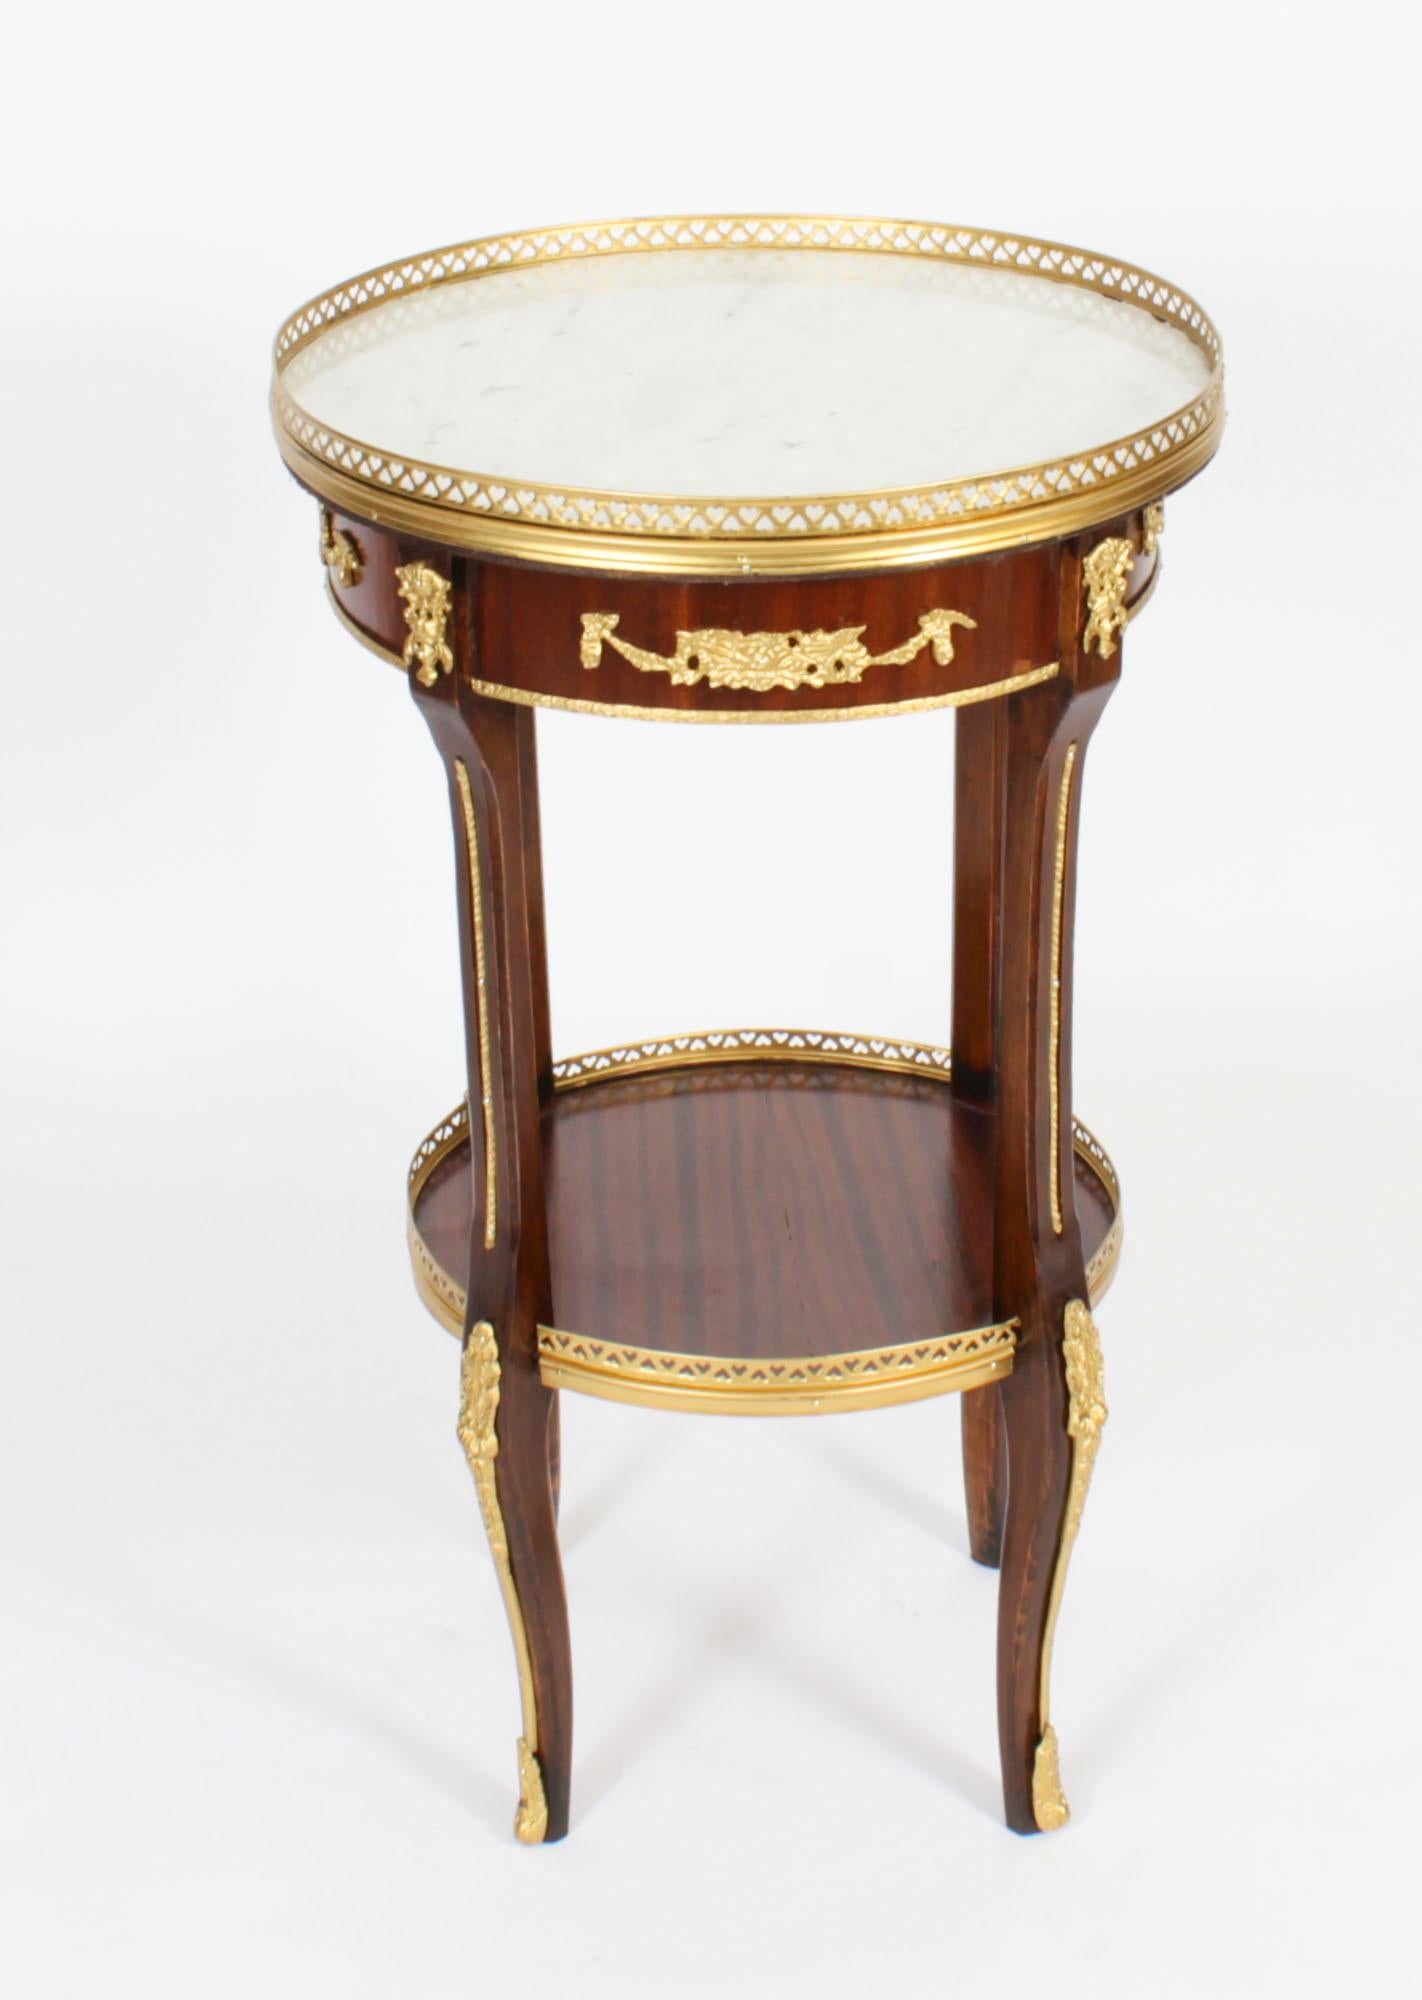 Antique French Empire Marble & Ormolu Occasional Table, 19th Century For Sale 11